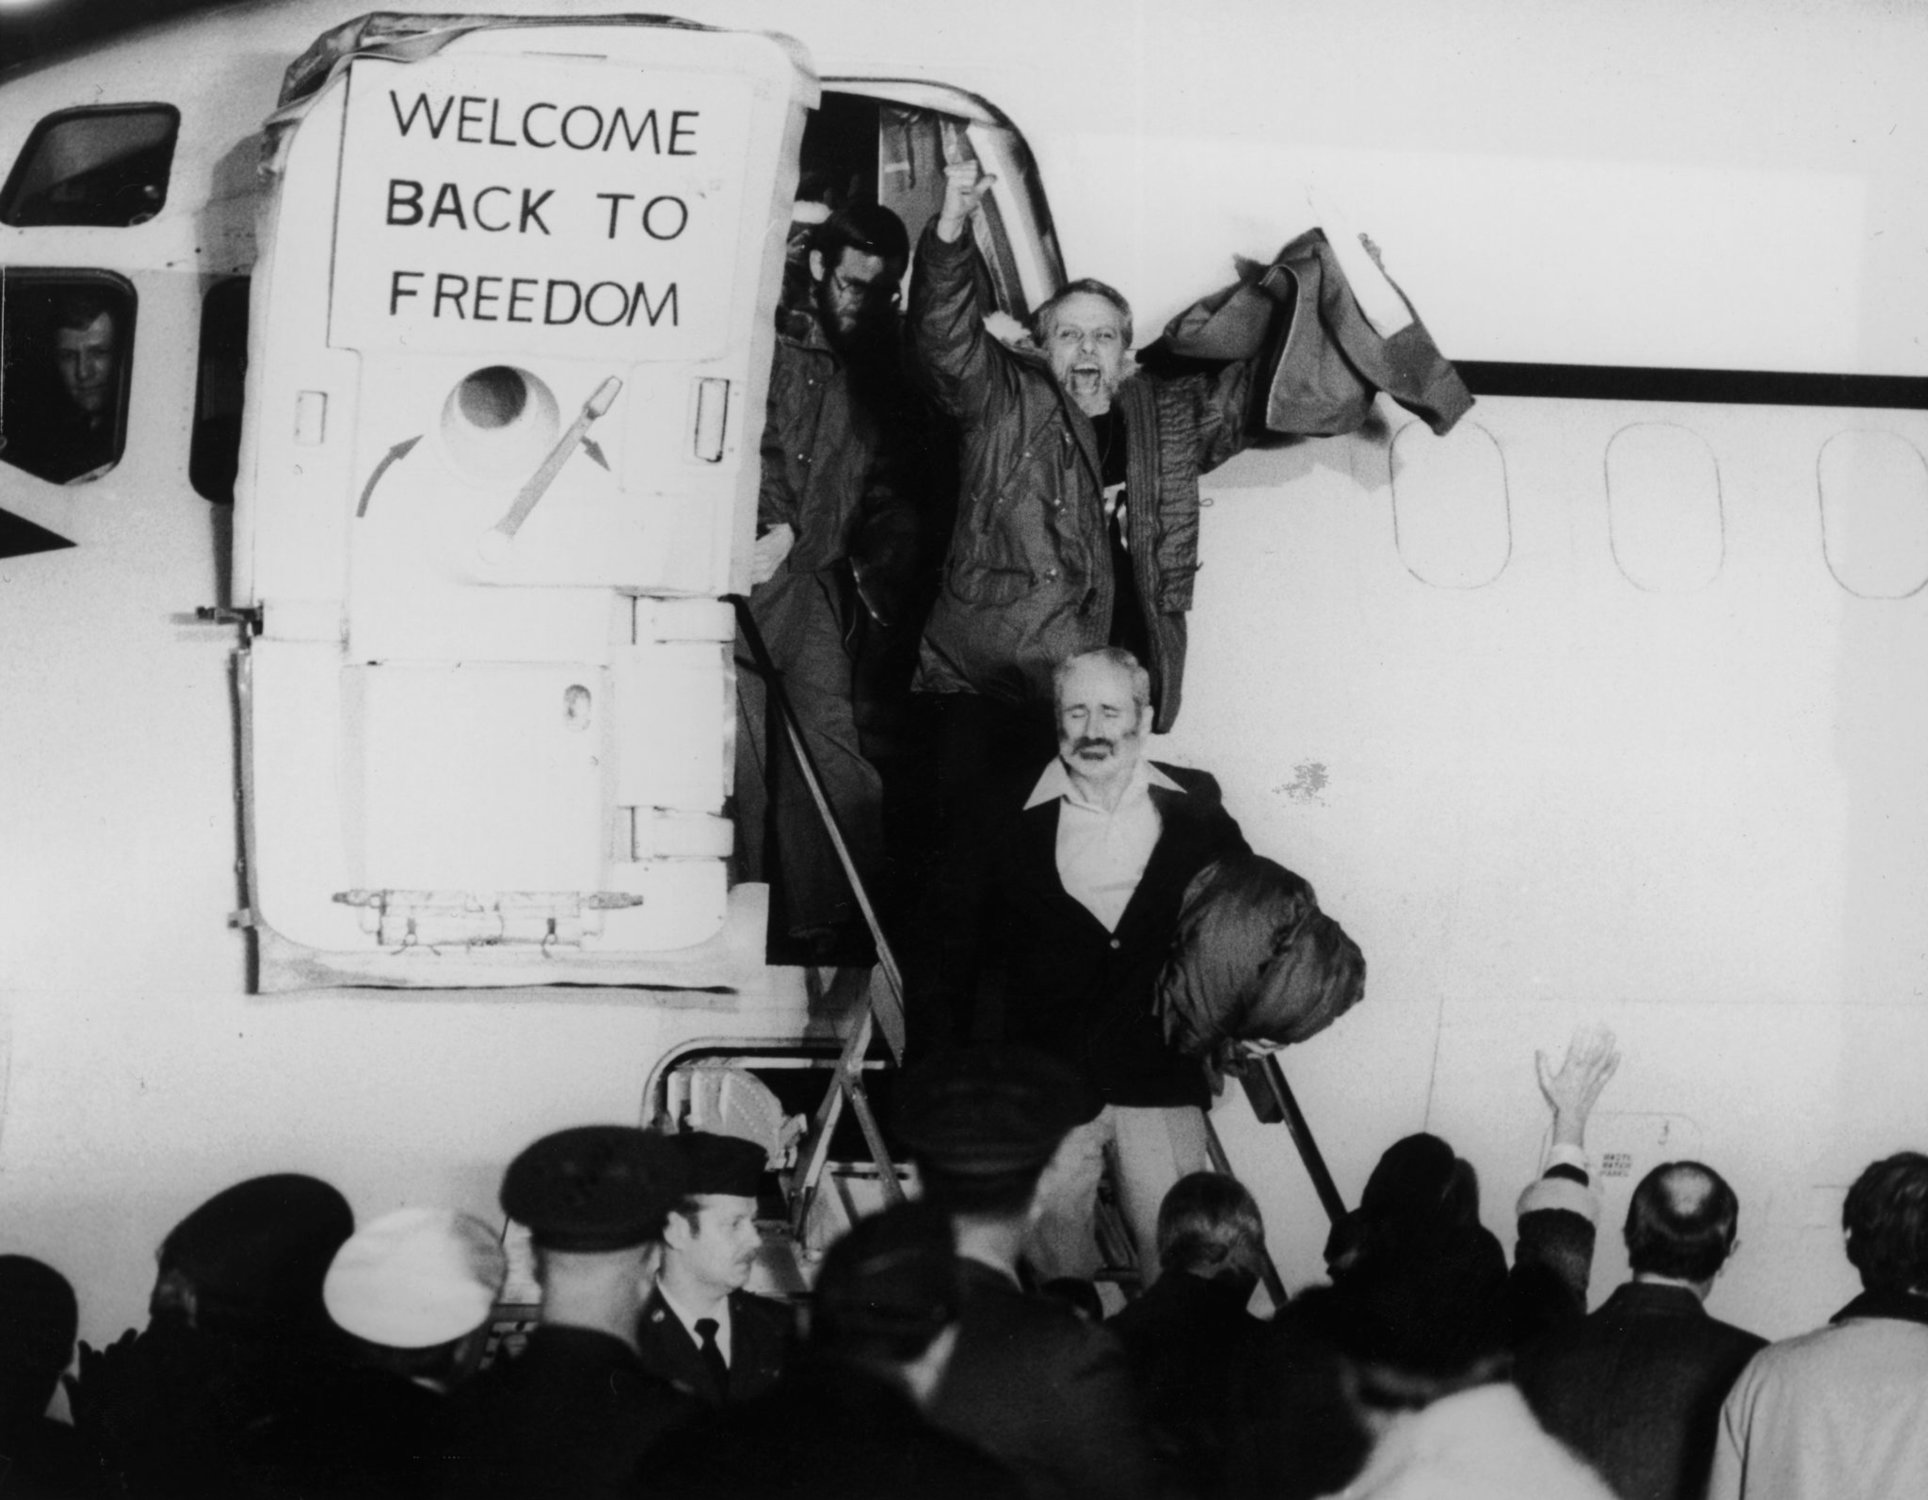 January 1981:  United States hostages departing an airplane on their return from Iran after being held for 444 days. One of the hostages is waving his fists in the air, and a sign on the plane door says, ‘Welcome Back to Freedom’.  (Photo by Express/Express/Getty Images)